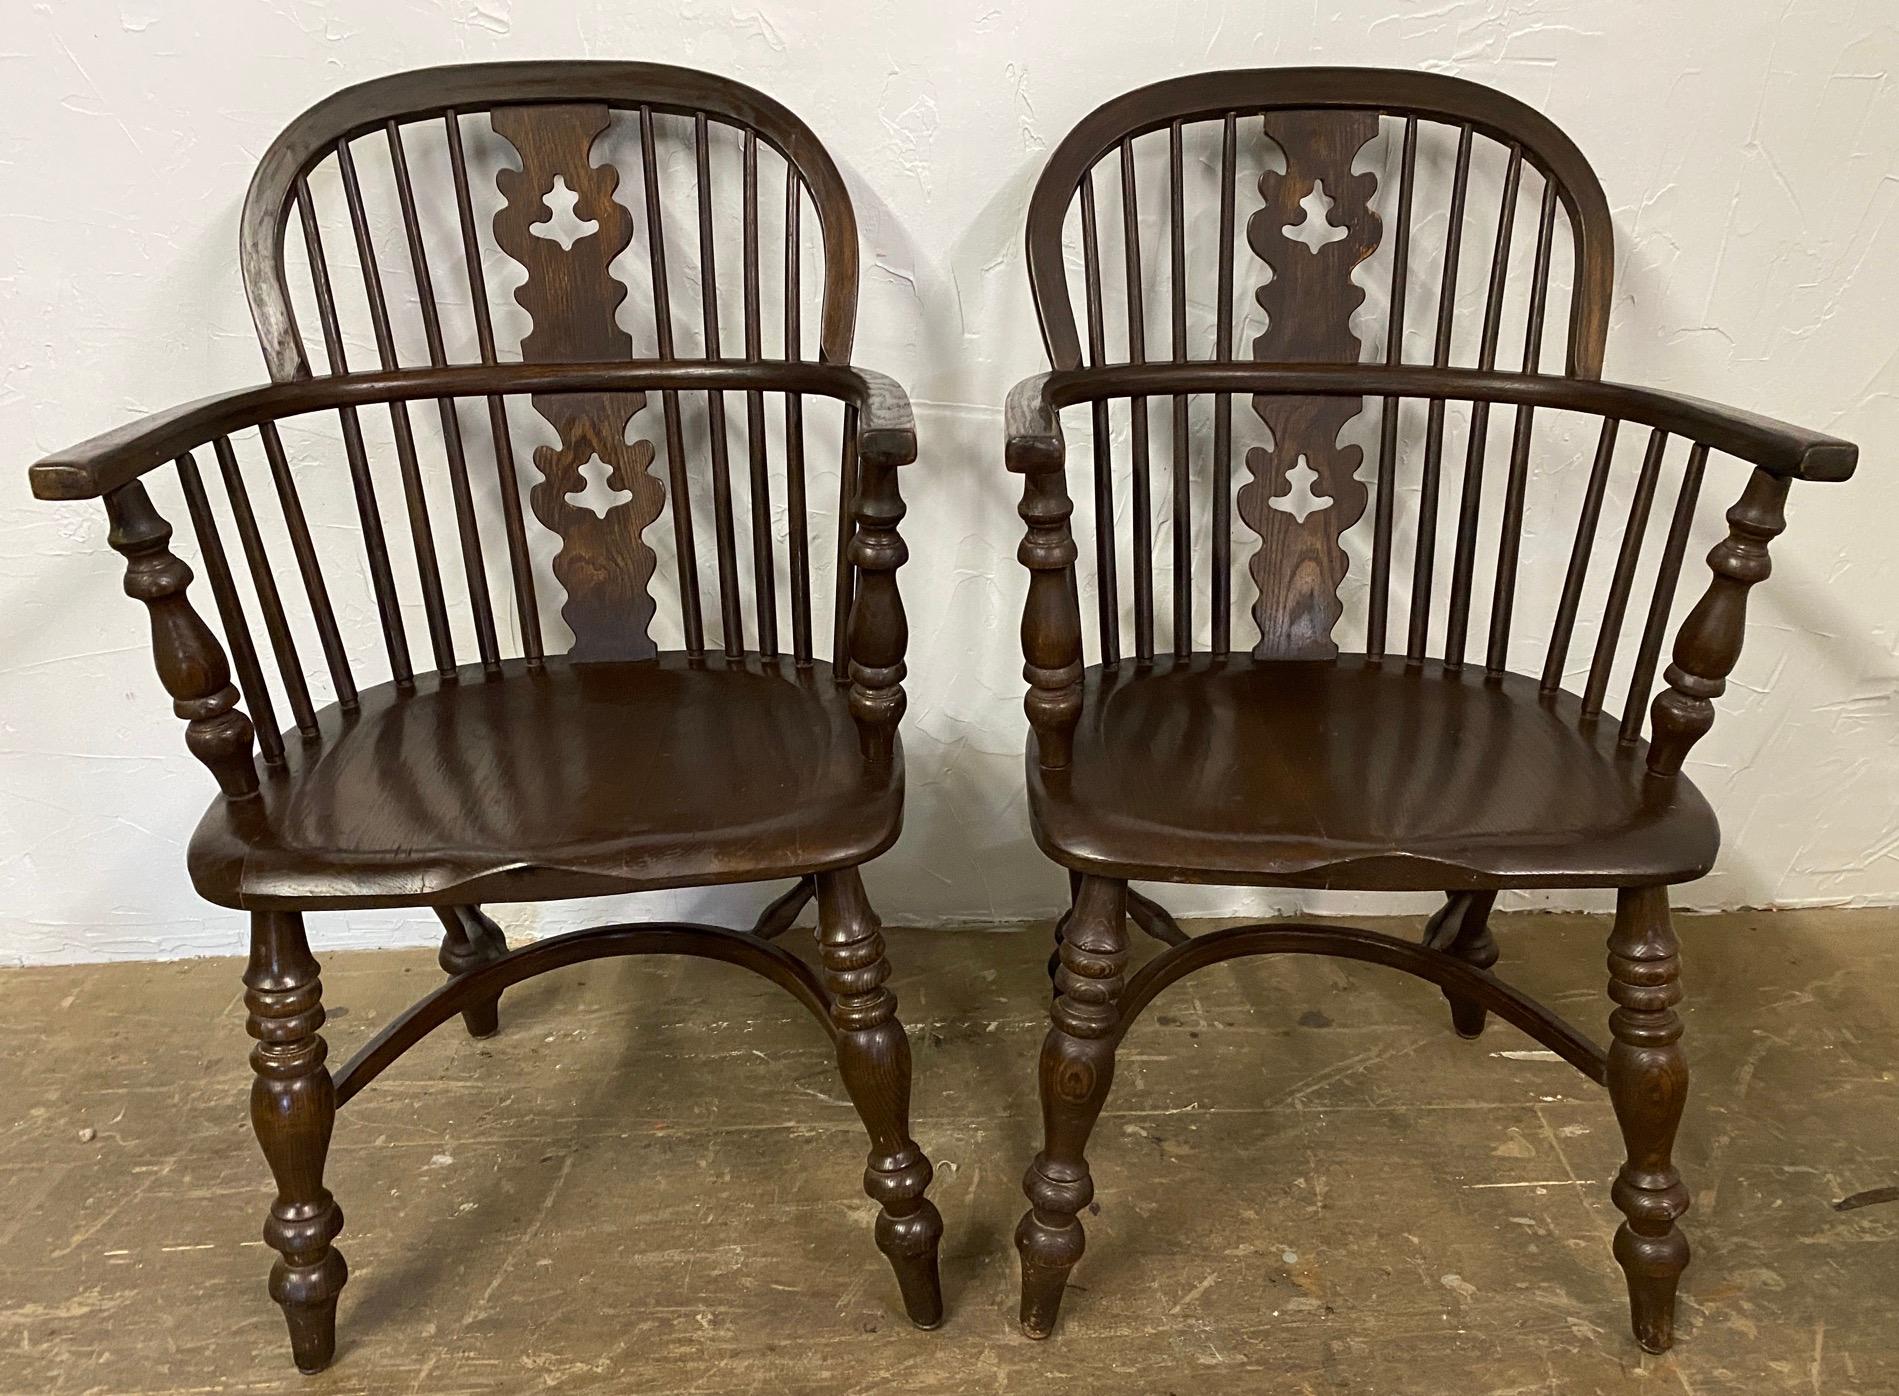 colonial windsor chairs